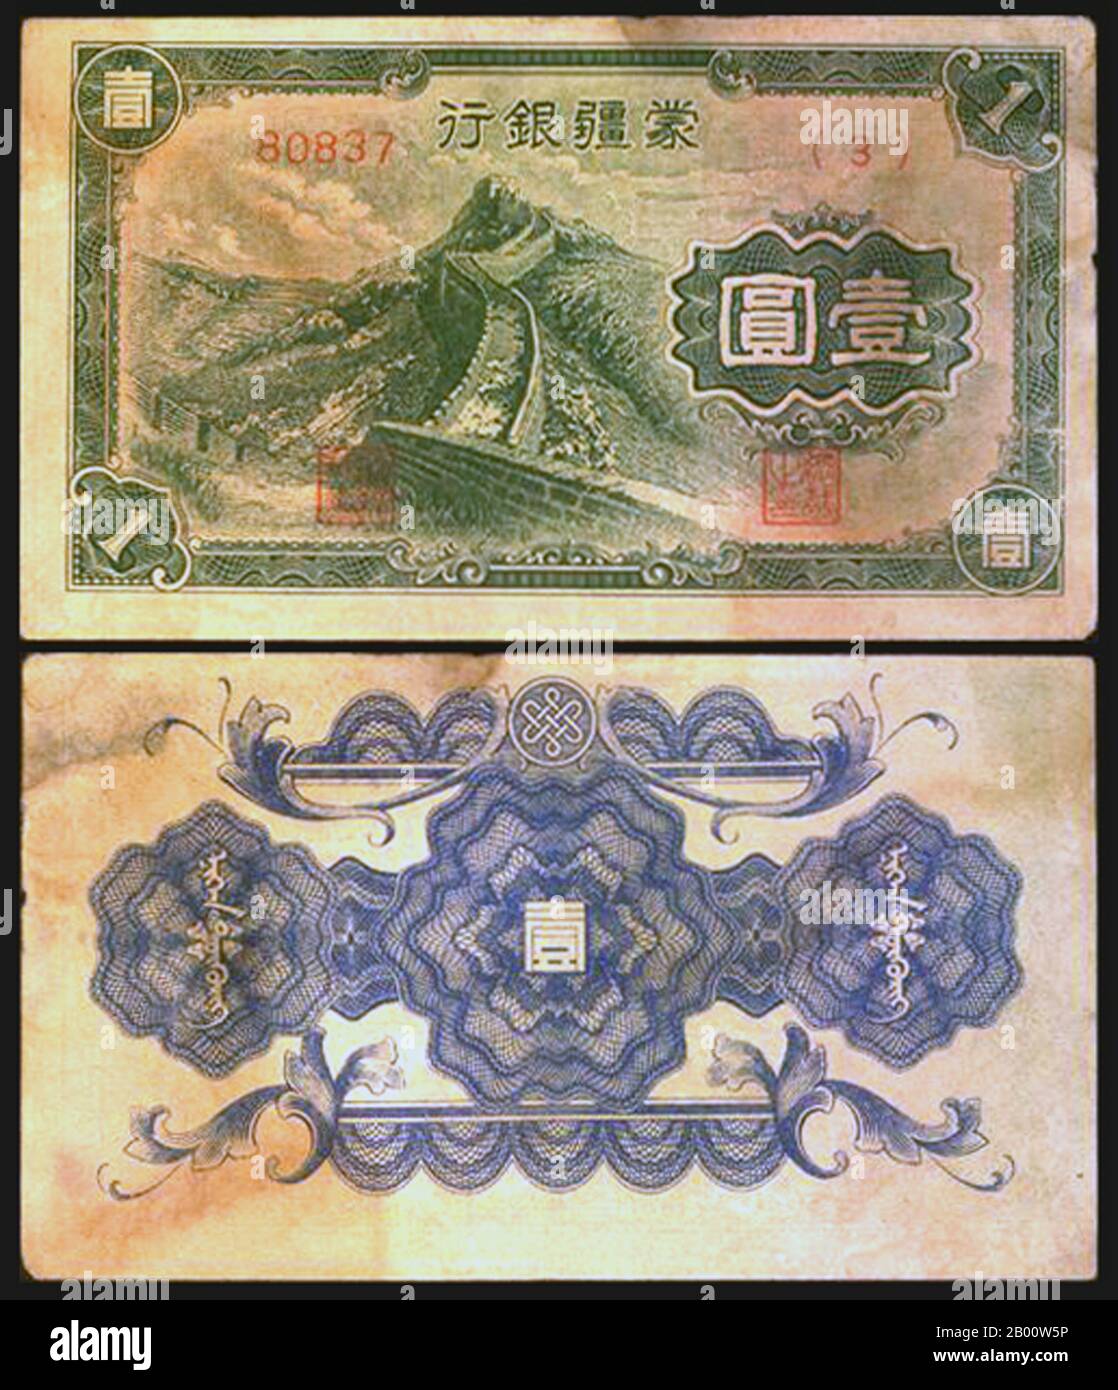 China: Paper currency of the Japanese puppet state of Mengjiang (Inner Mongolia), 1940.  Mengjiang (Meng-chiang; Postal map spelling: Mengkiang), also known in English as Mongol Border Land, was a Japanese puppet area in Inner Mongolia, operating under nominal Chinese sovereignty and Japanese control. It consisted of the then-Chinese provinces of Chahar and Suiyuan, corresponding to the central part of modern Inner Mongolia. The capital was Kalgan, and the ruler was Demchugdongrub. Stock Photo